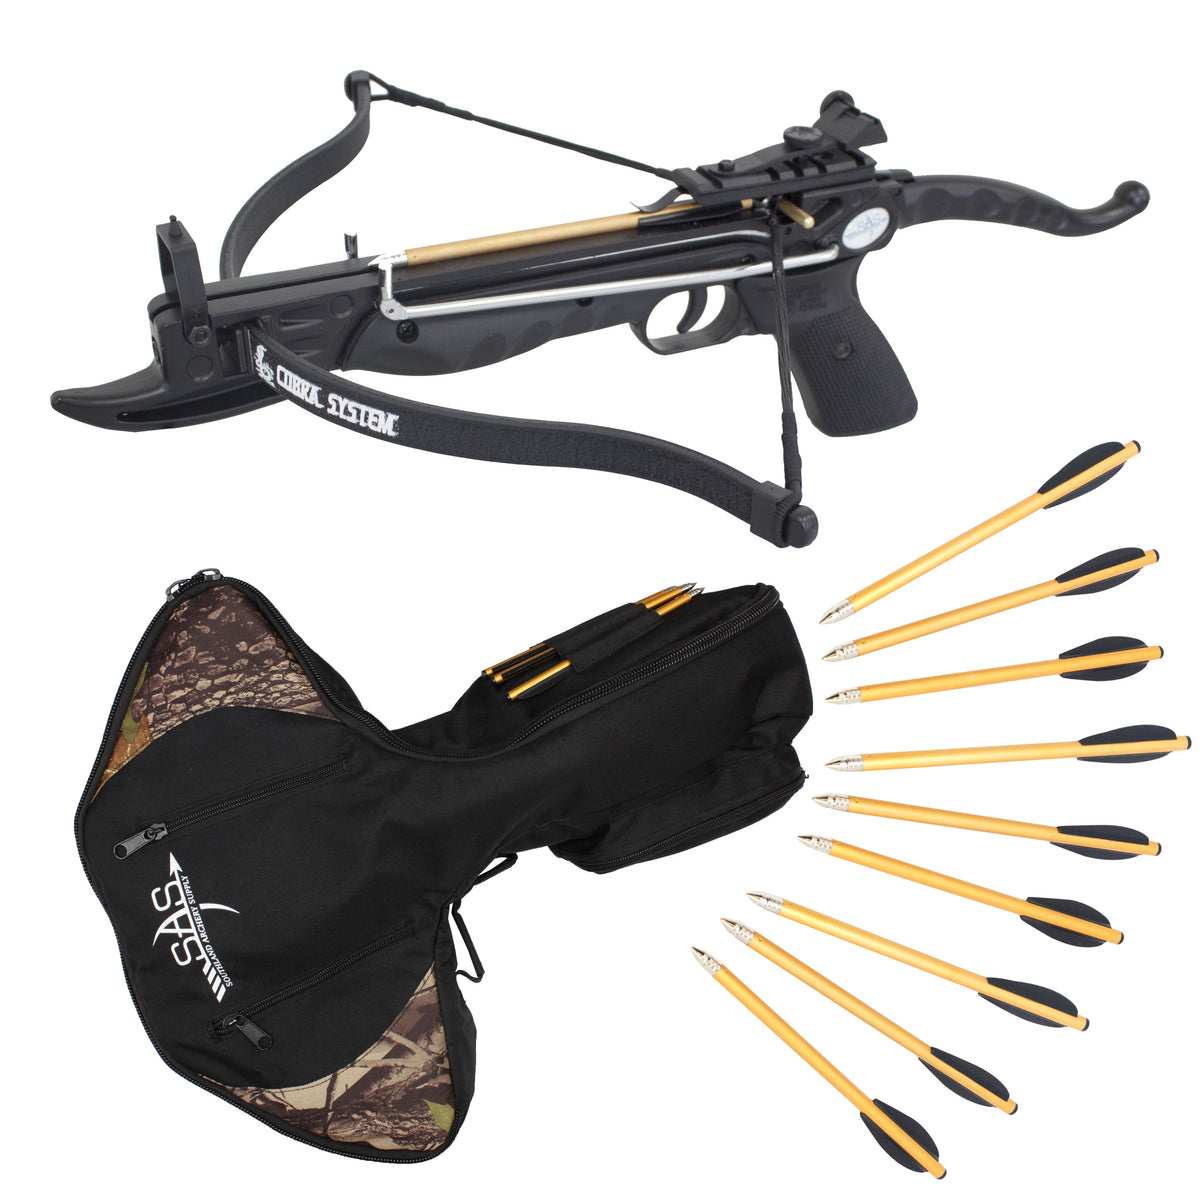 SAS Prophecy 80 Pound Self-cocking Pistol Crossbow + Carrying